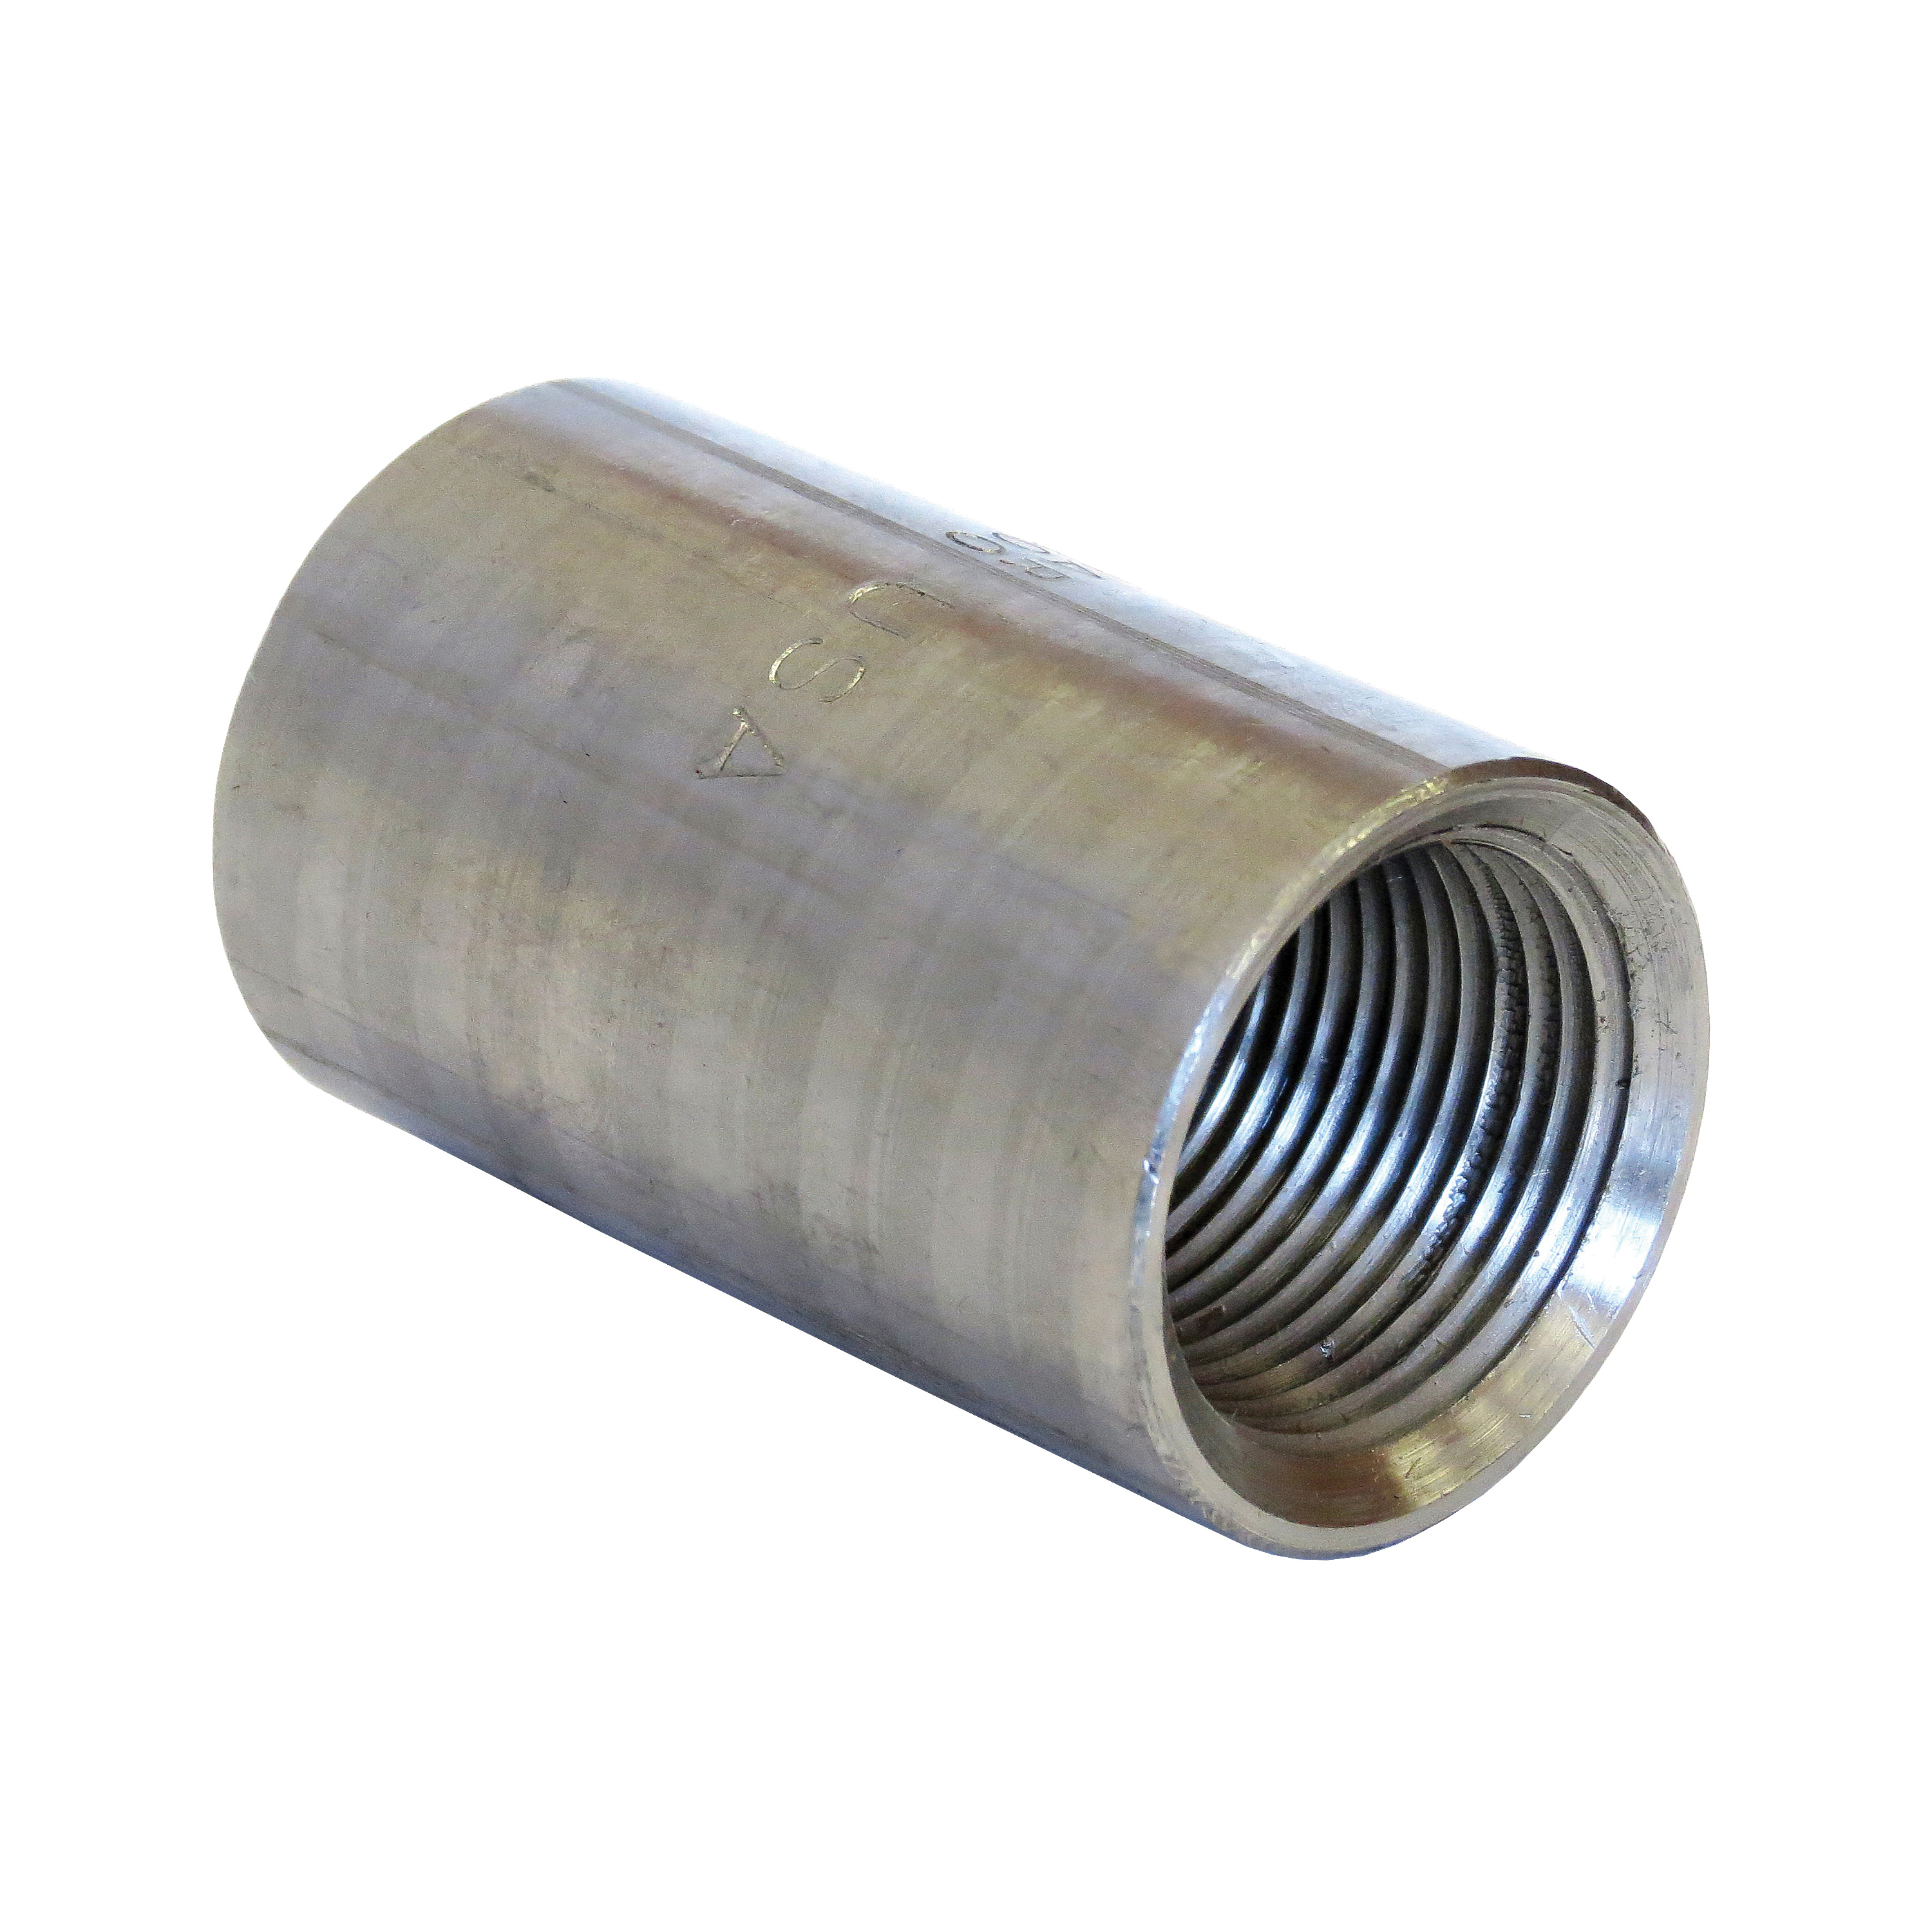 0321200479 Taper Tapped Pipe Coupling, 3/8 in, SCH 80/XH, Galvanized, Domestic